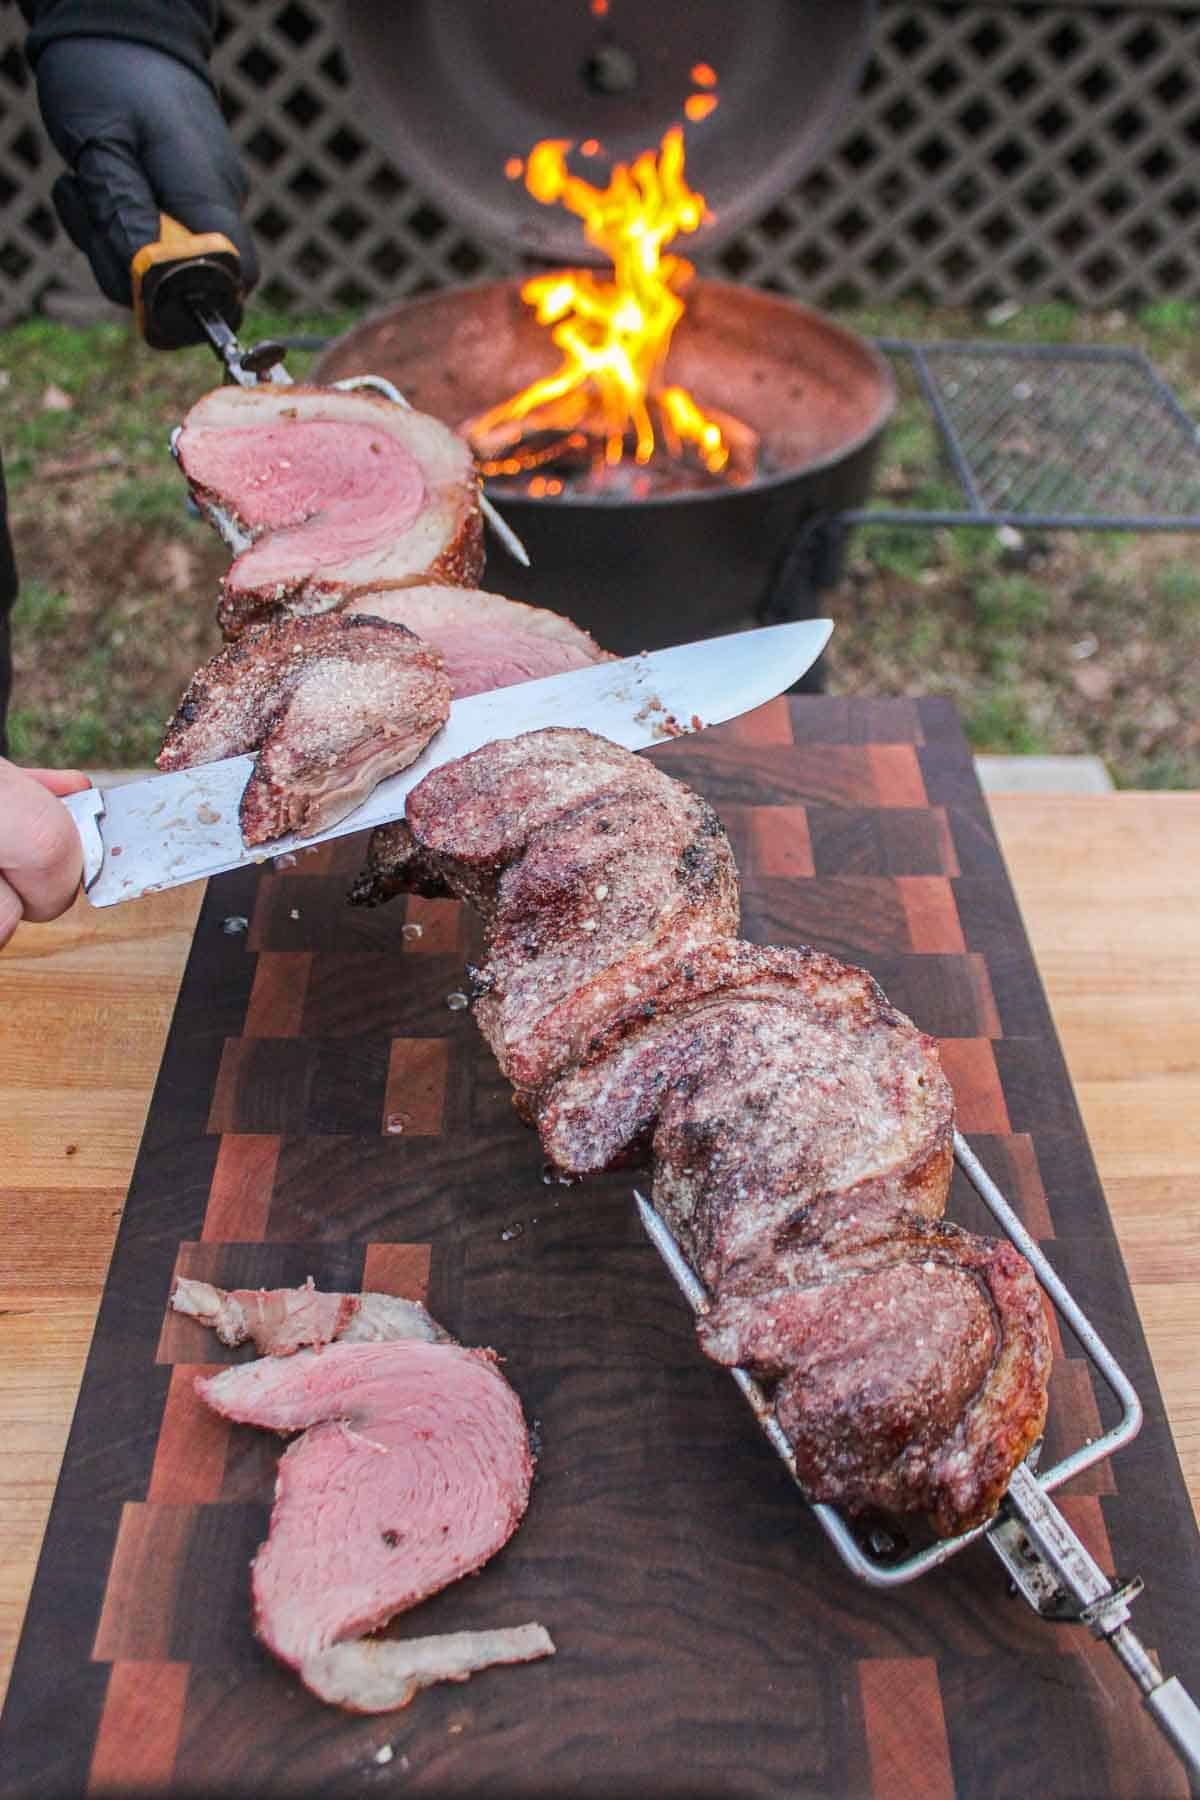 Slicing the rotisserie picanha off the skewer.